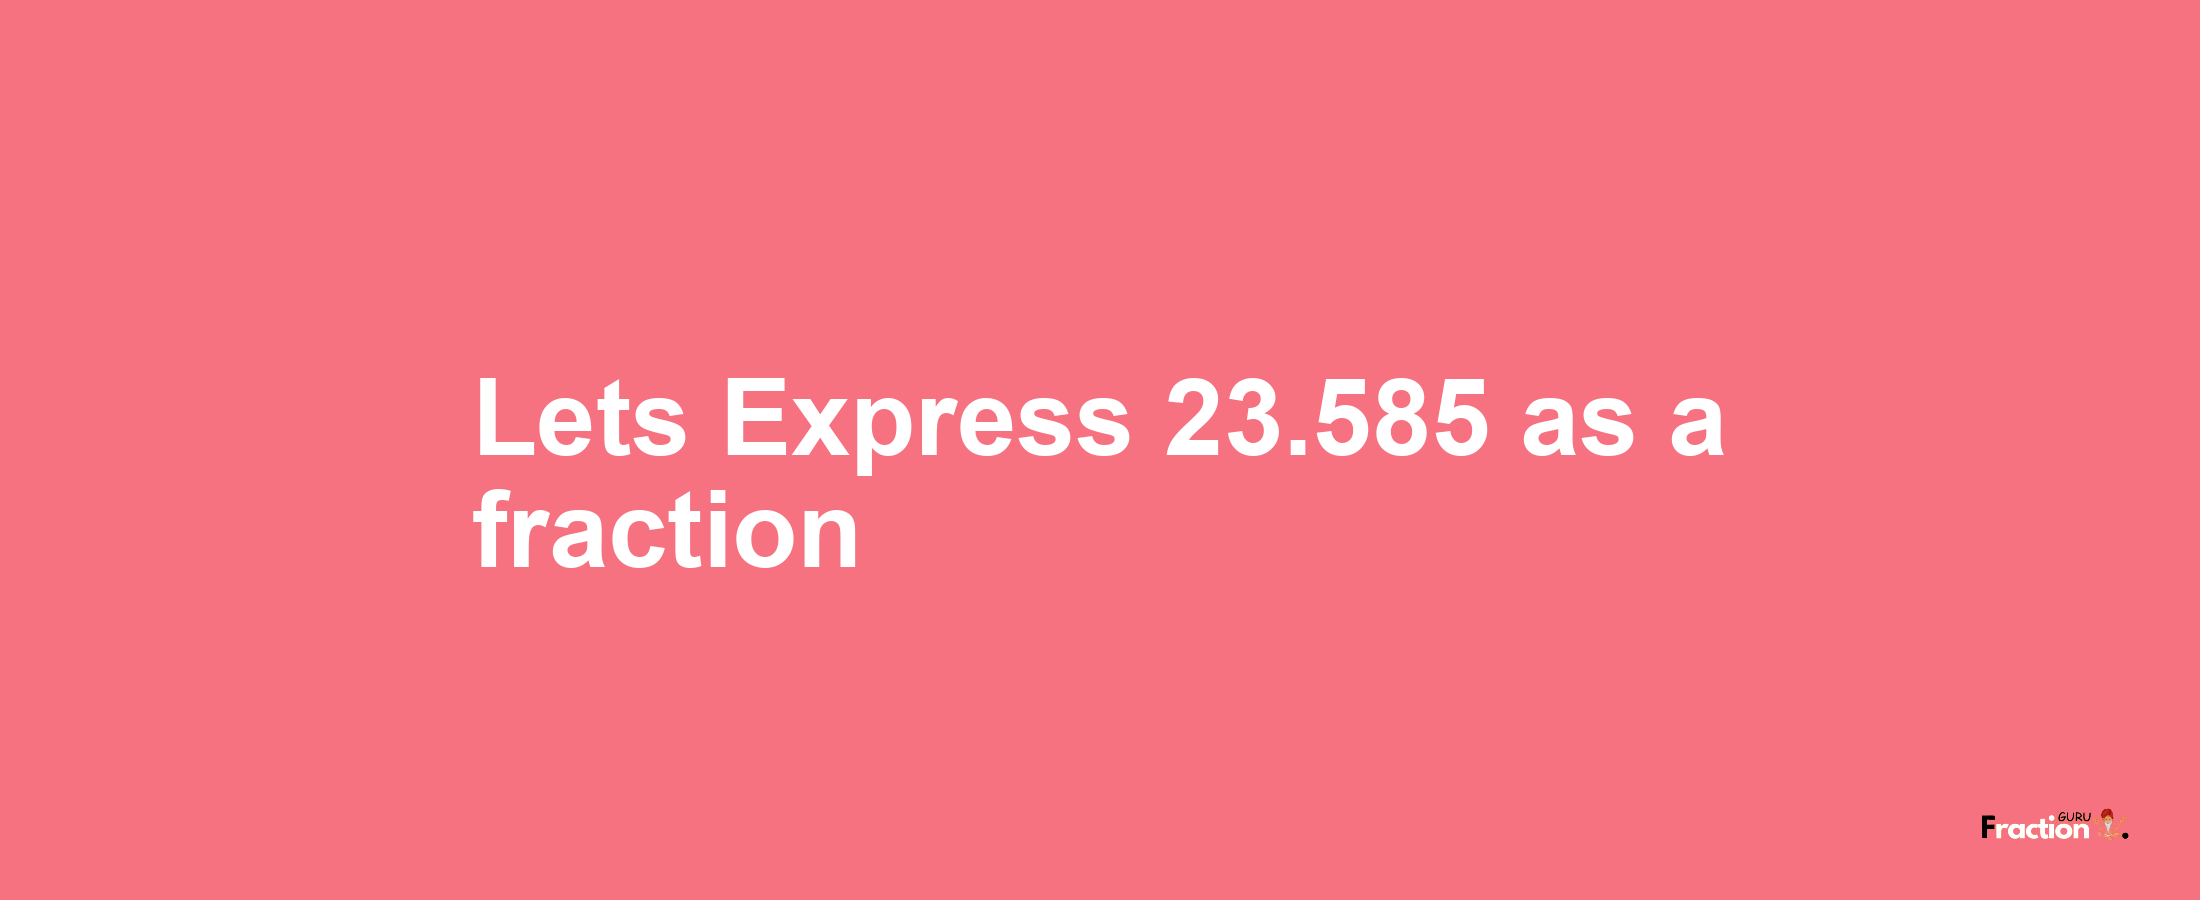 Lets Express 23.585 as afraction